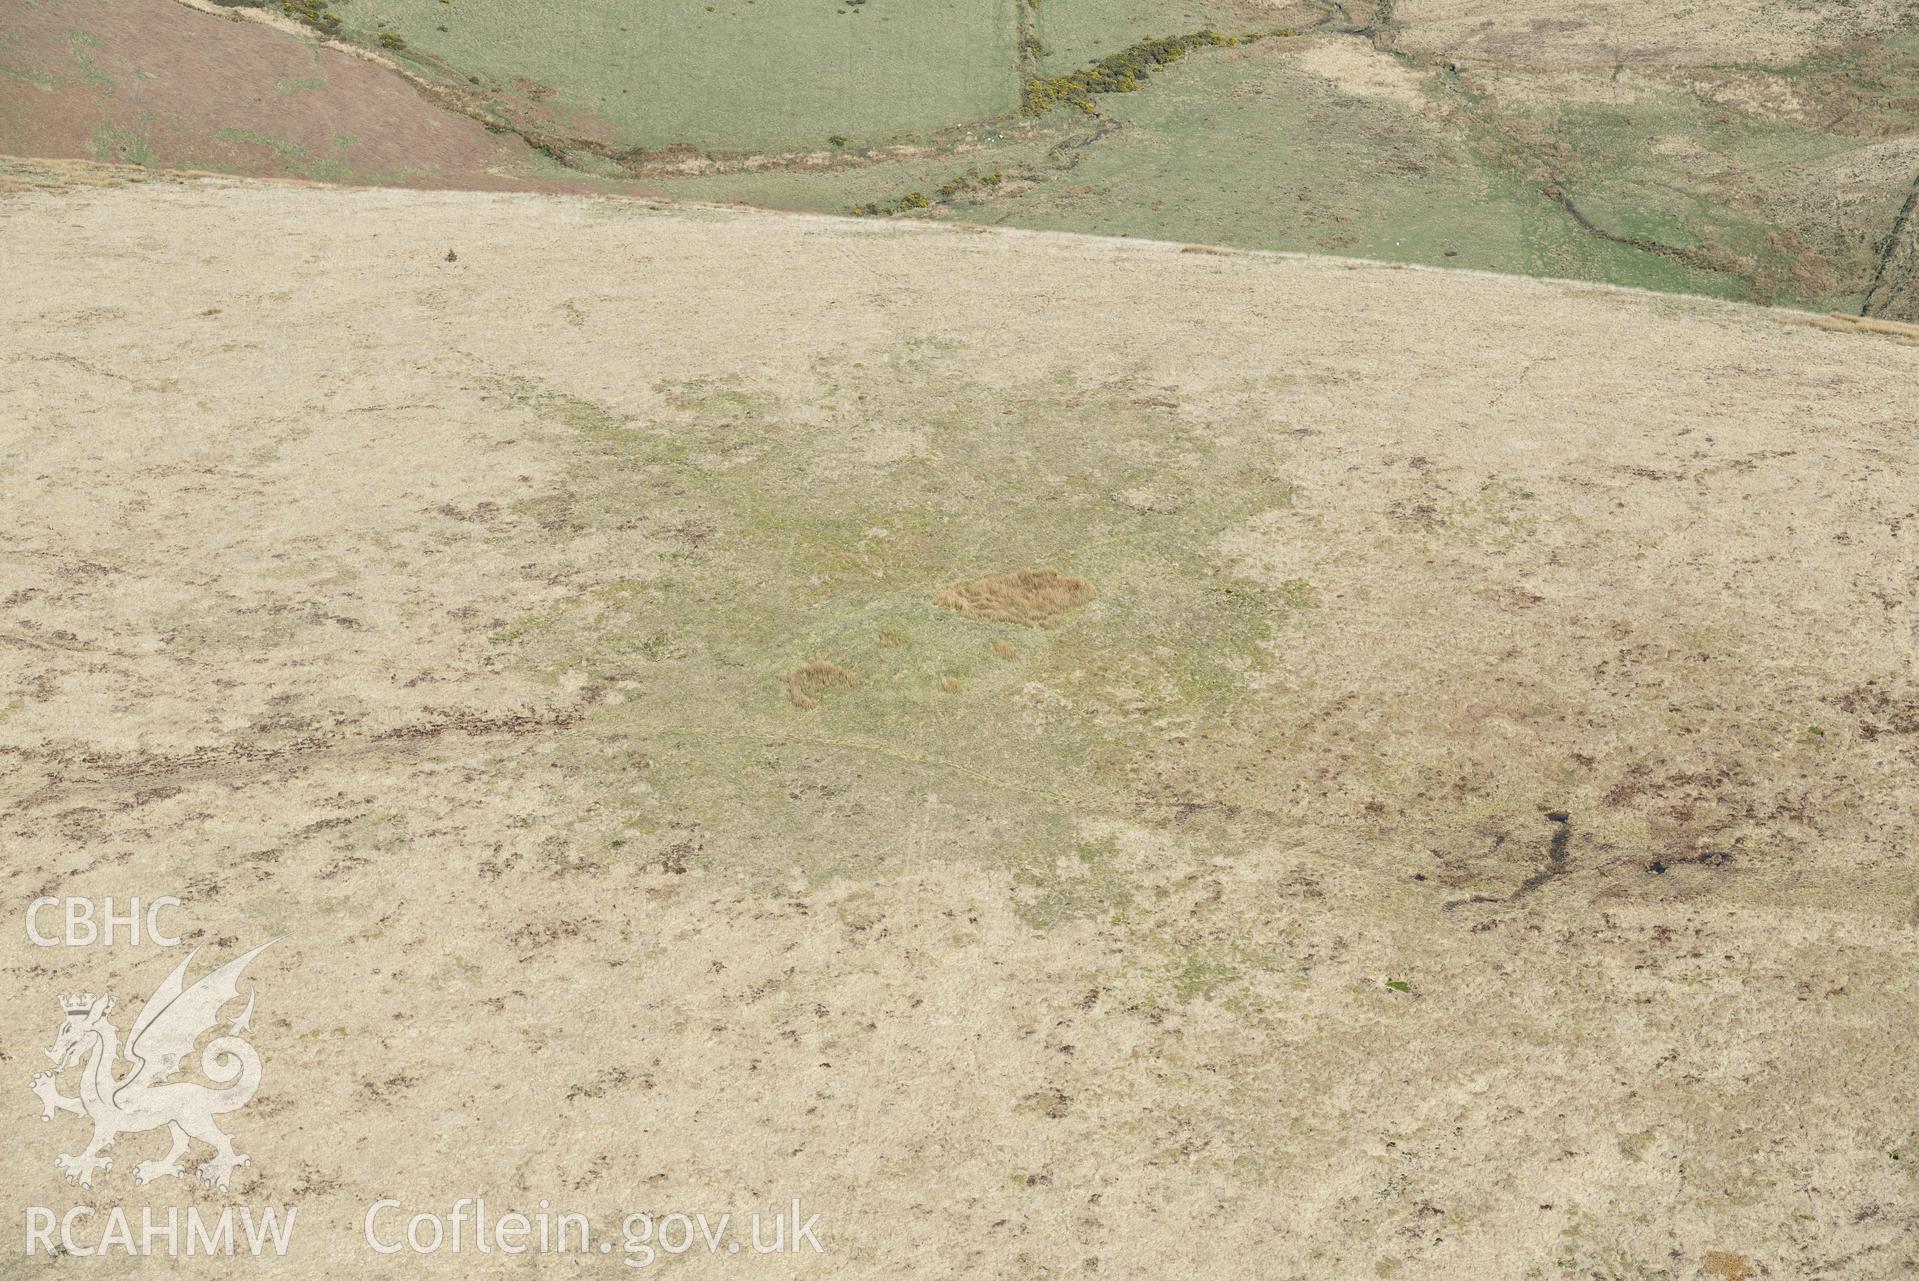 Foel Cwm-Cerwyn, Cairn 1. Oblique aerial photograph taken during the Royal Commission's programme of archaeological aerial reconnaissance by Toby Driver on 15th April 2015.'